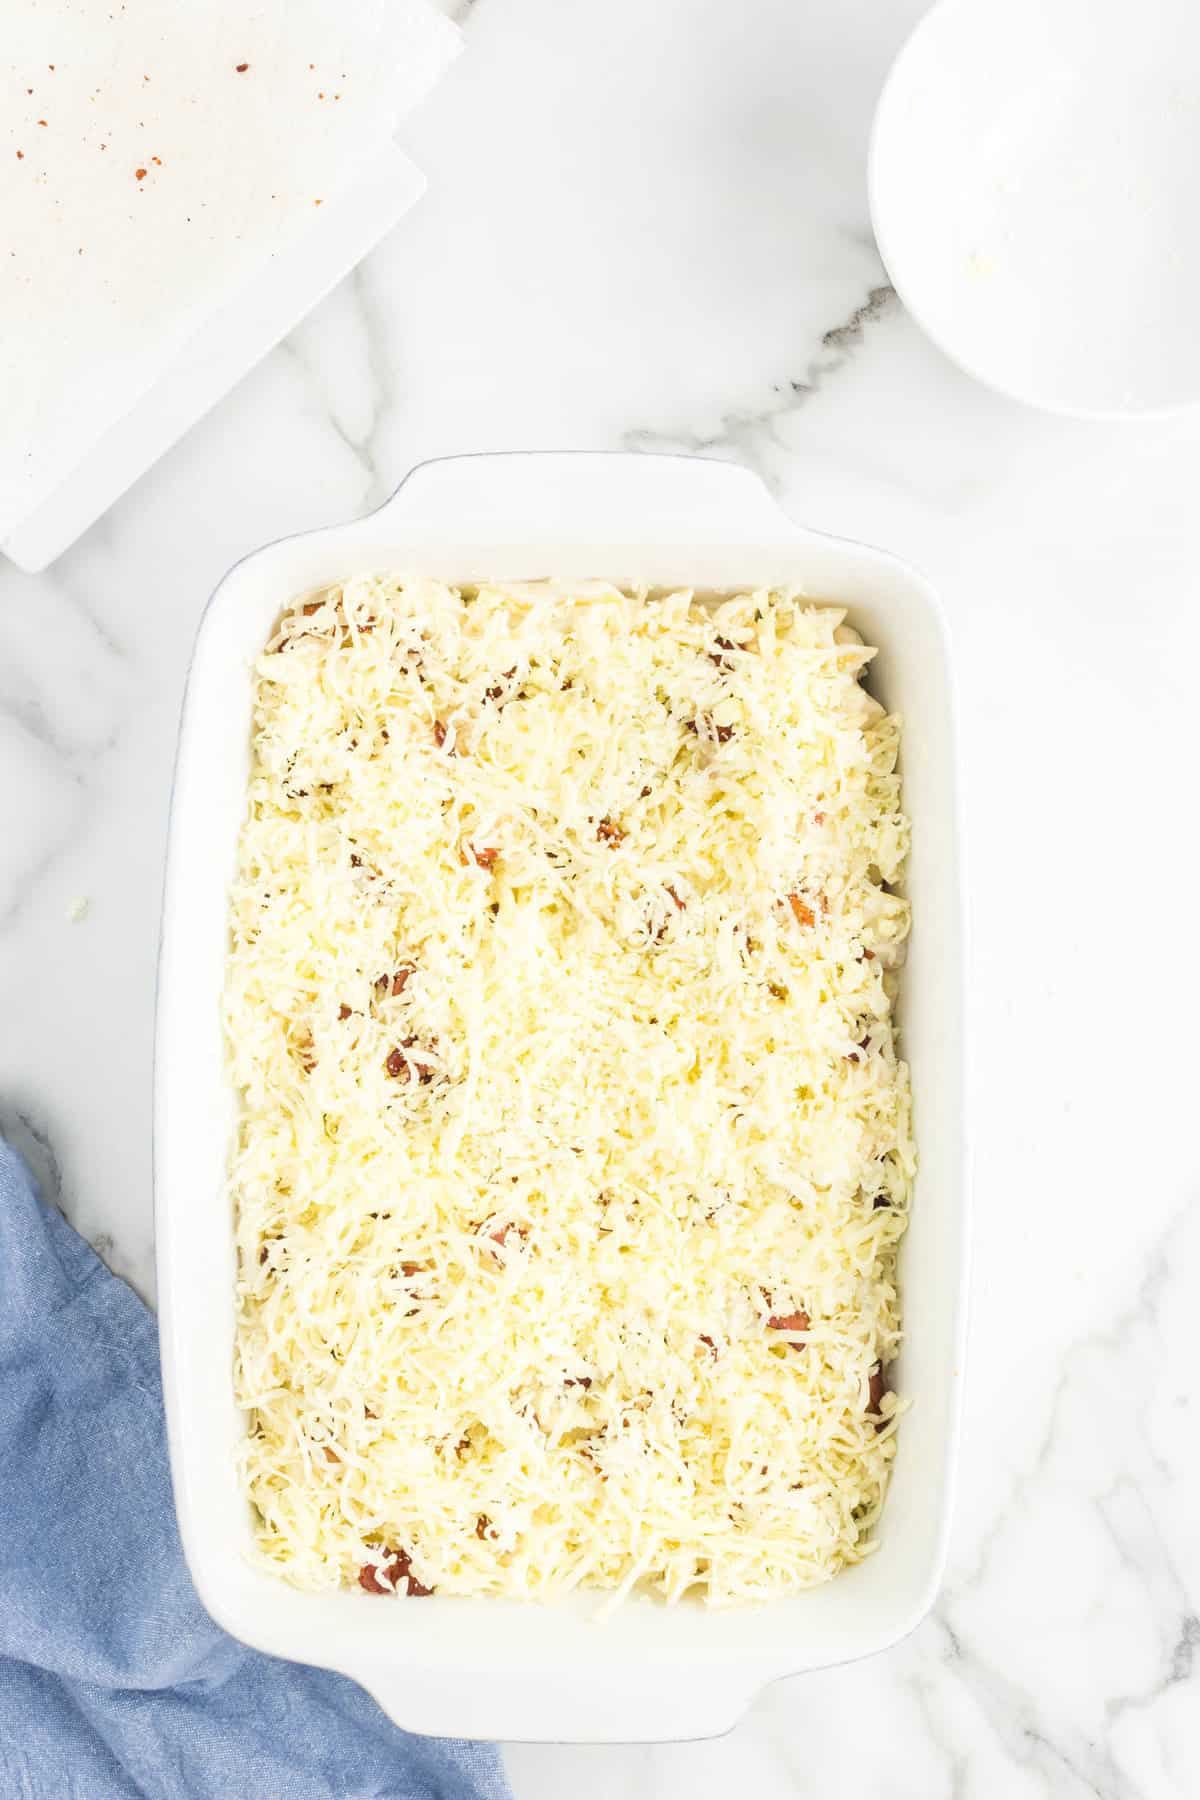 Topping casserole with shredded cheese for Chicken Bacon Ranch Pasta Bake